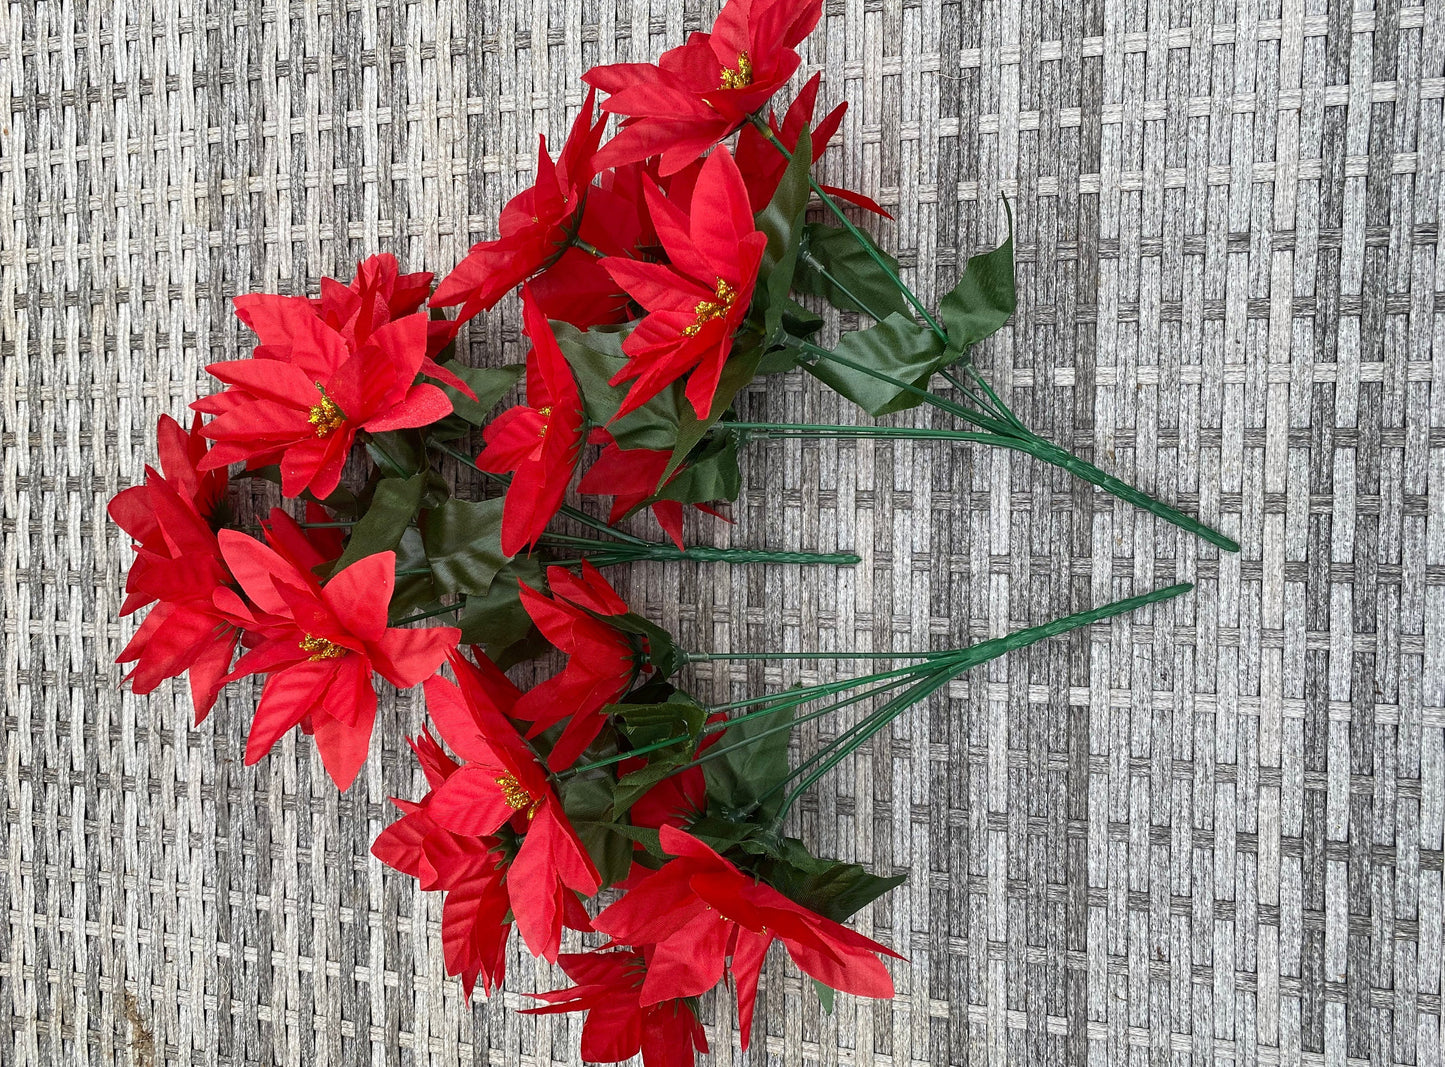 21 Head - 3  Bunches Artificial Red Poinsettias  Christmas Flowers 30 CM Length